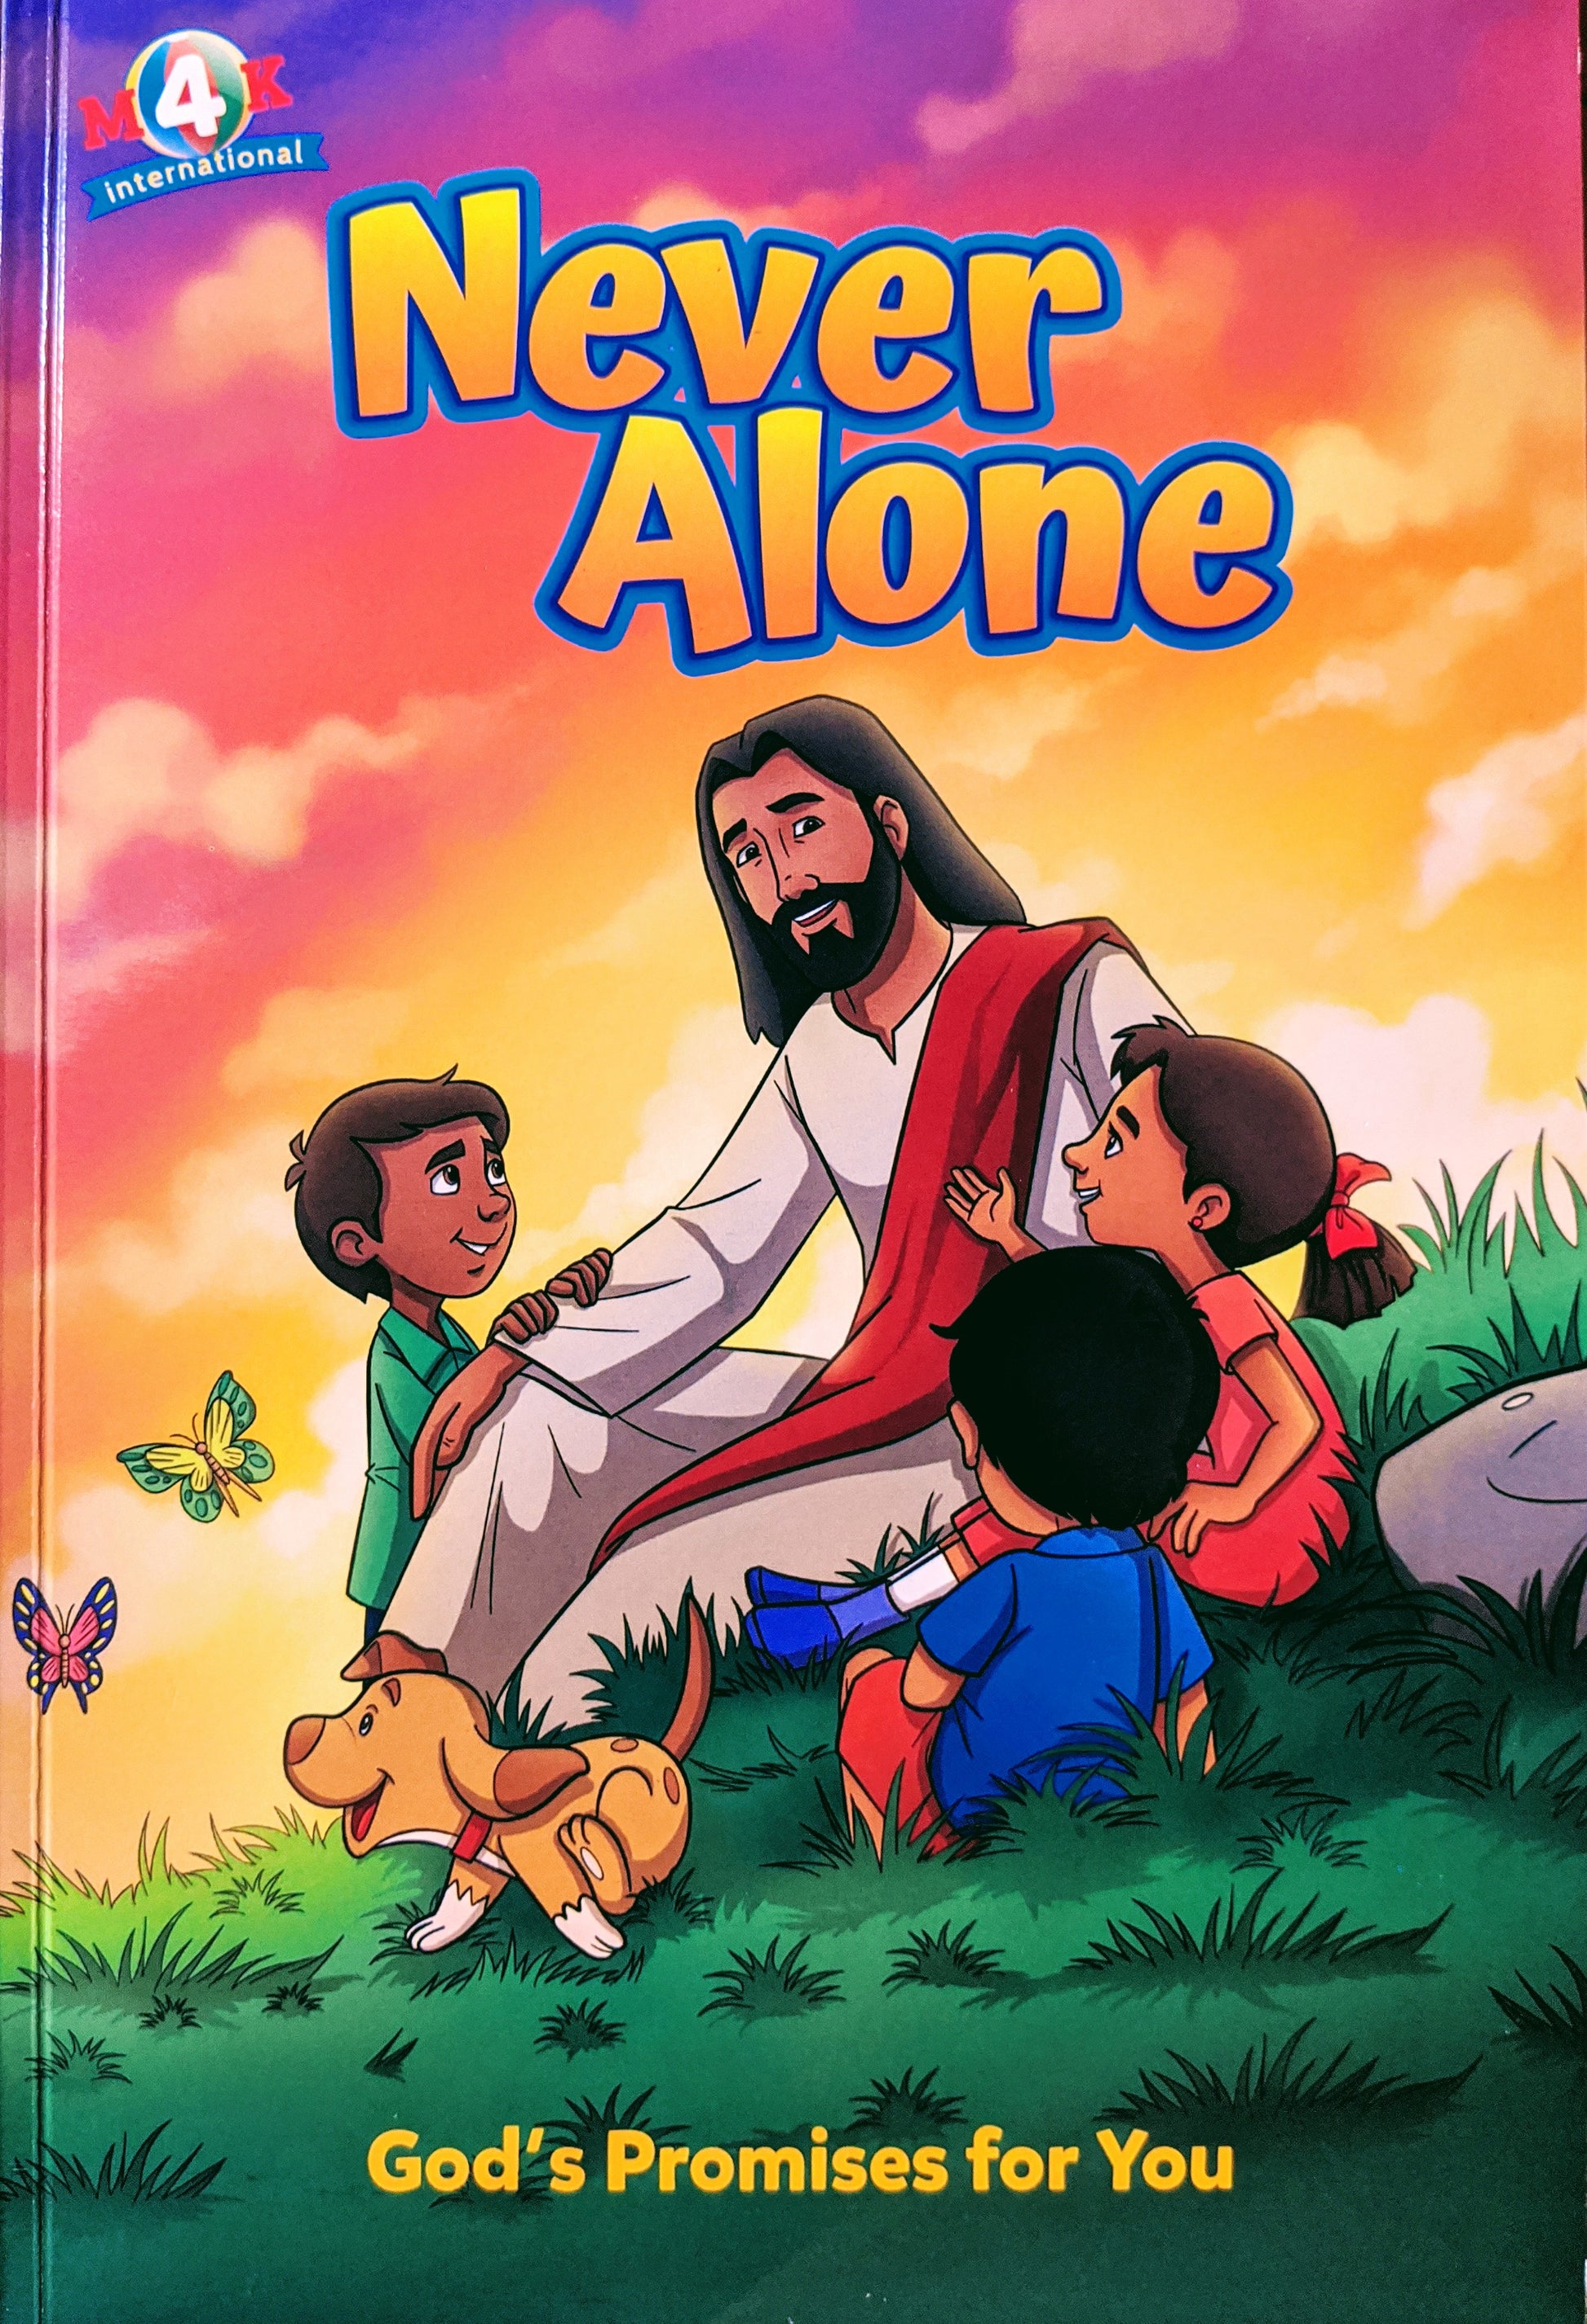 Find it in our books section and help us carry the message of Christ.Be part of Our Mission! Our products speak for themselves Our daily prayer is that the many vulnerable and abandoned children in this world are able to experience God’s personal love for each one of them. This motivates us to do all we can to get out the M4KI Libraries and material to encourage & help them to grow in Christ!